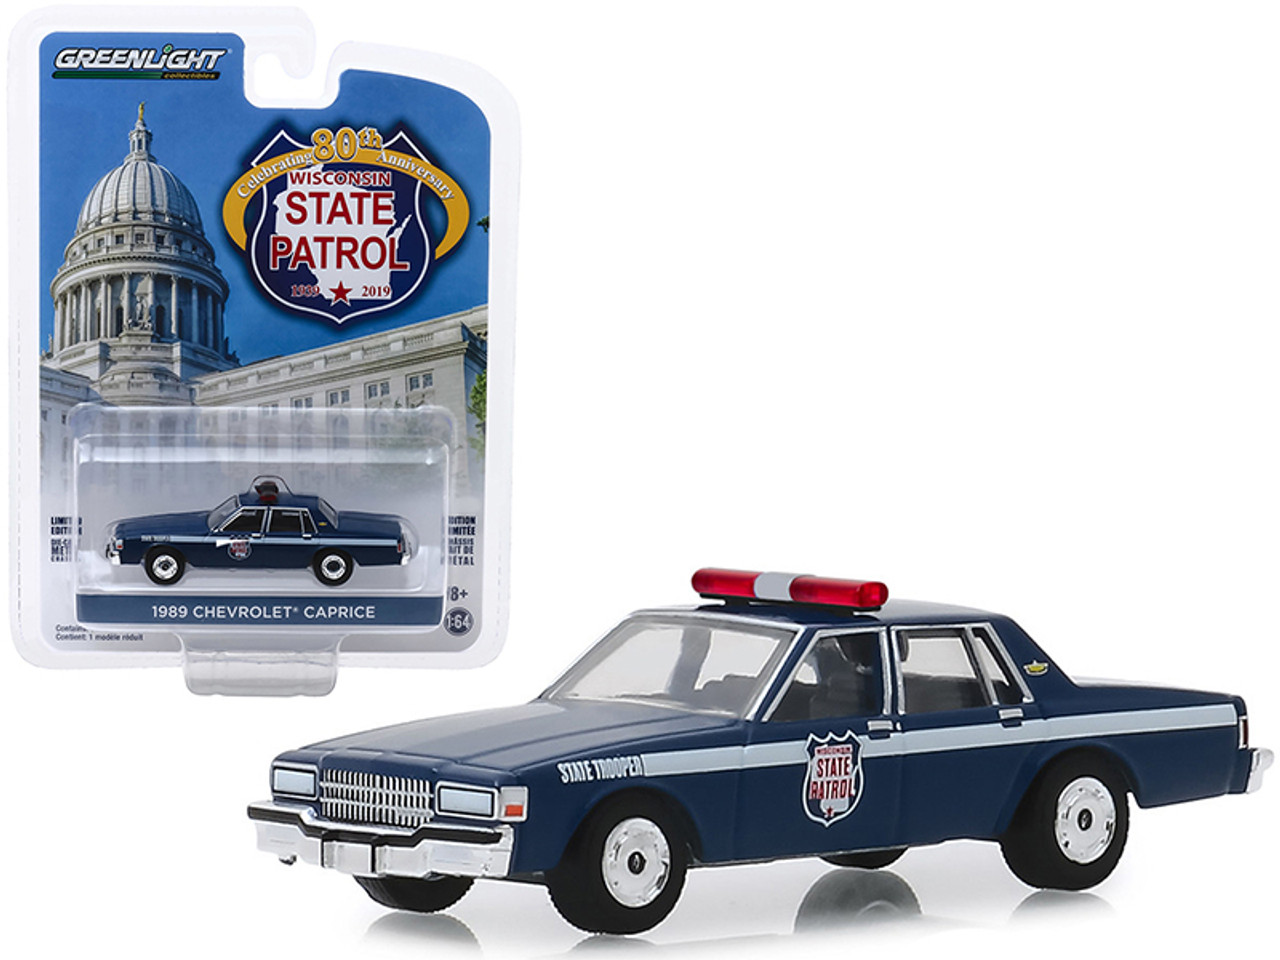 1989 Chevrolet Caprice Police Car Dark Blue "Wisconsin State Patrol 80th Anniversary" (1939-2019) "Anniversary Collection" Series 9 1/64 Diecast Model Car by Greenlight